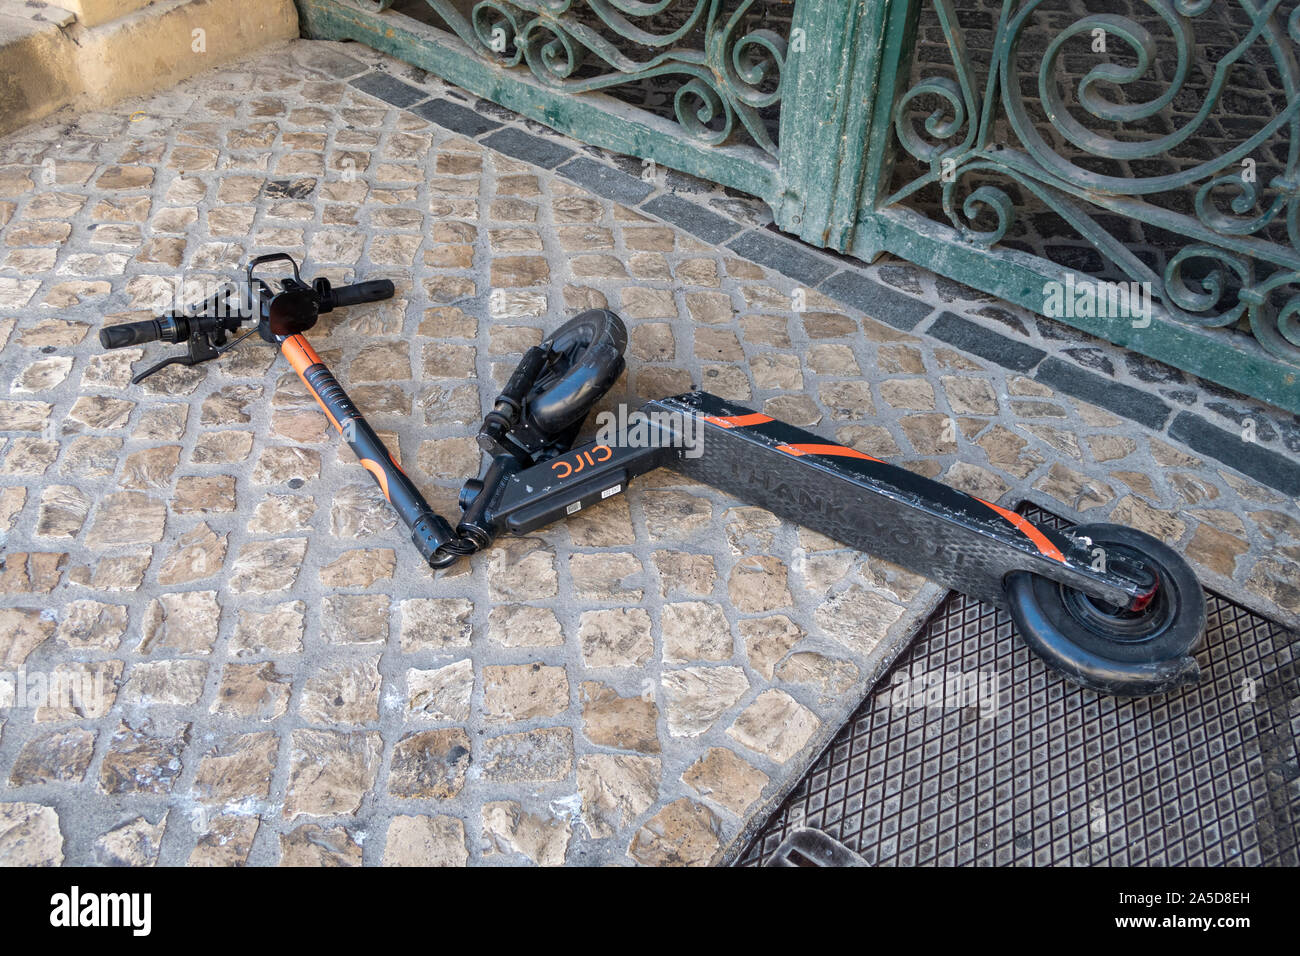 Vandalized electric e-scooter tossed on the sidewalk with broken steering column Stock Photo